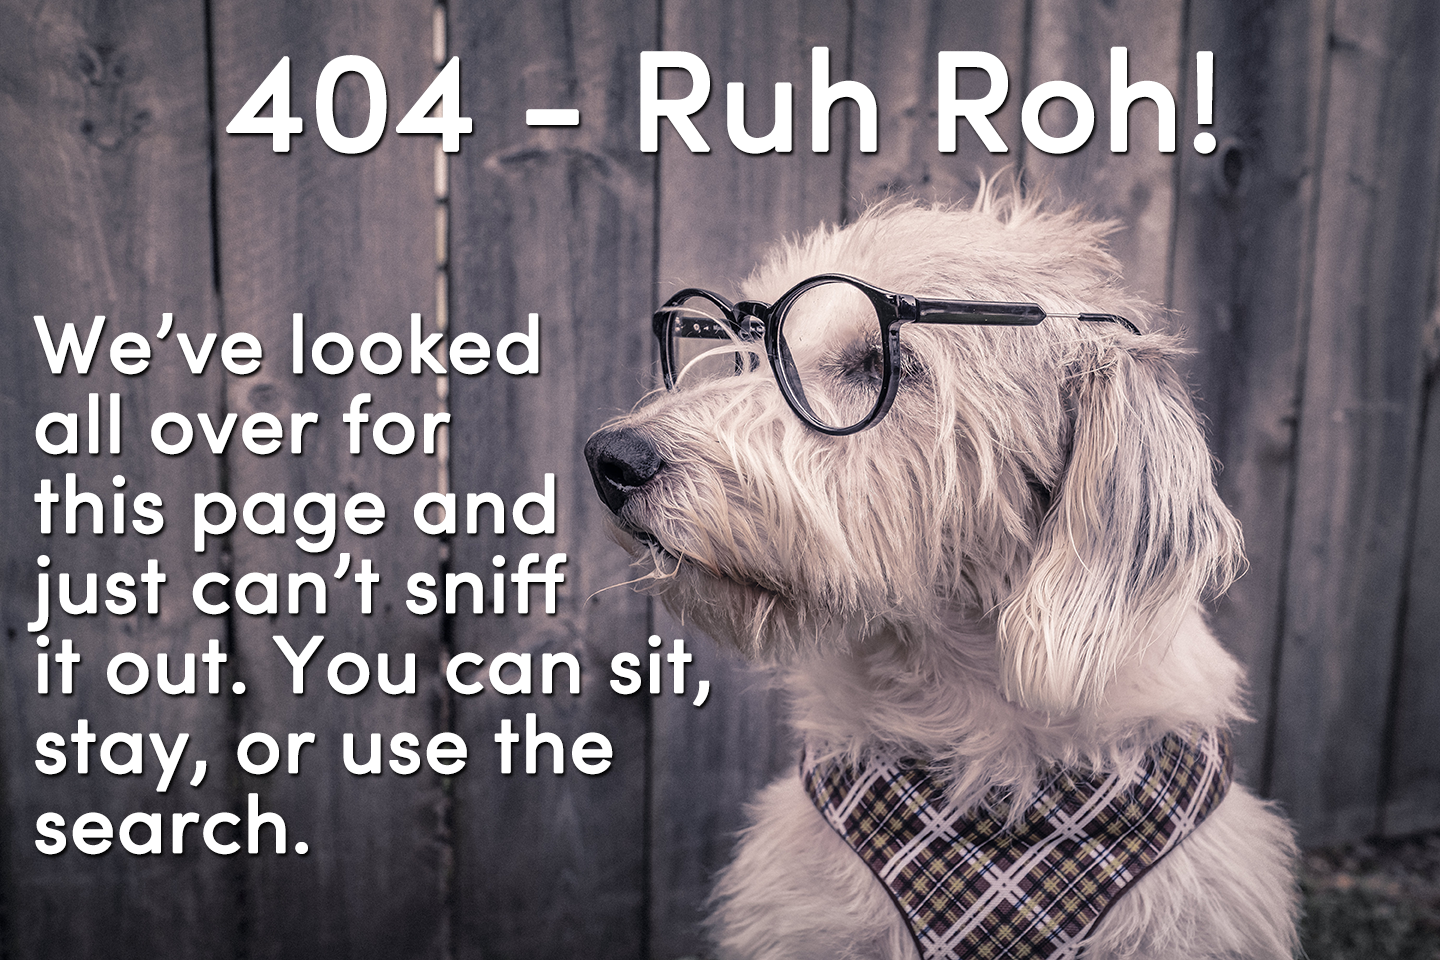 404 - Ruh Roh - We've looked all over for this page